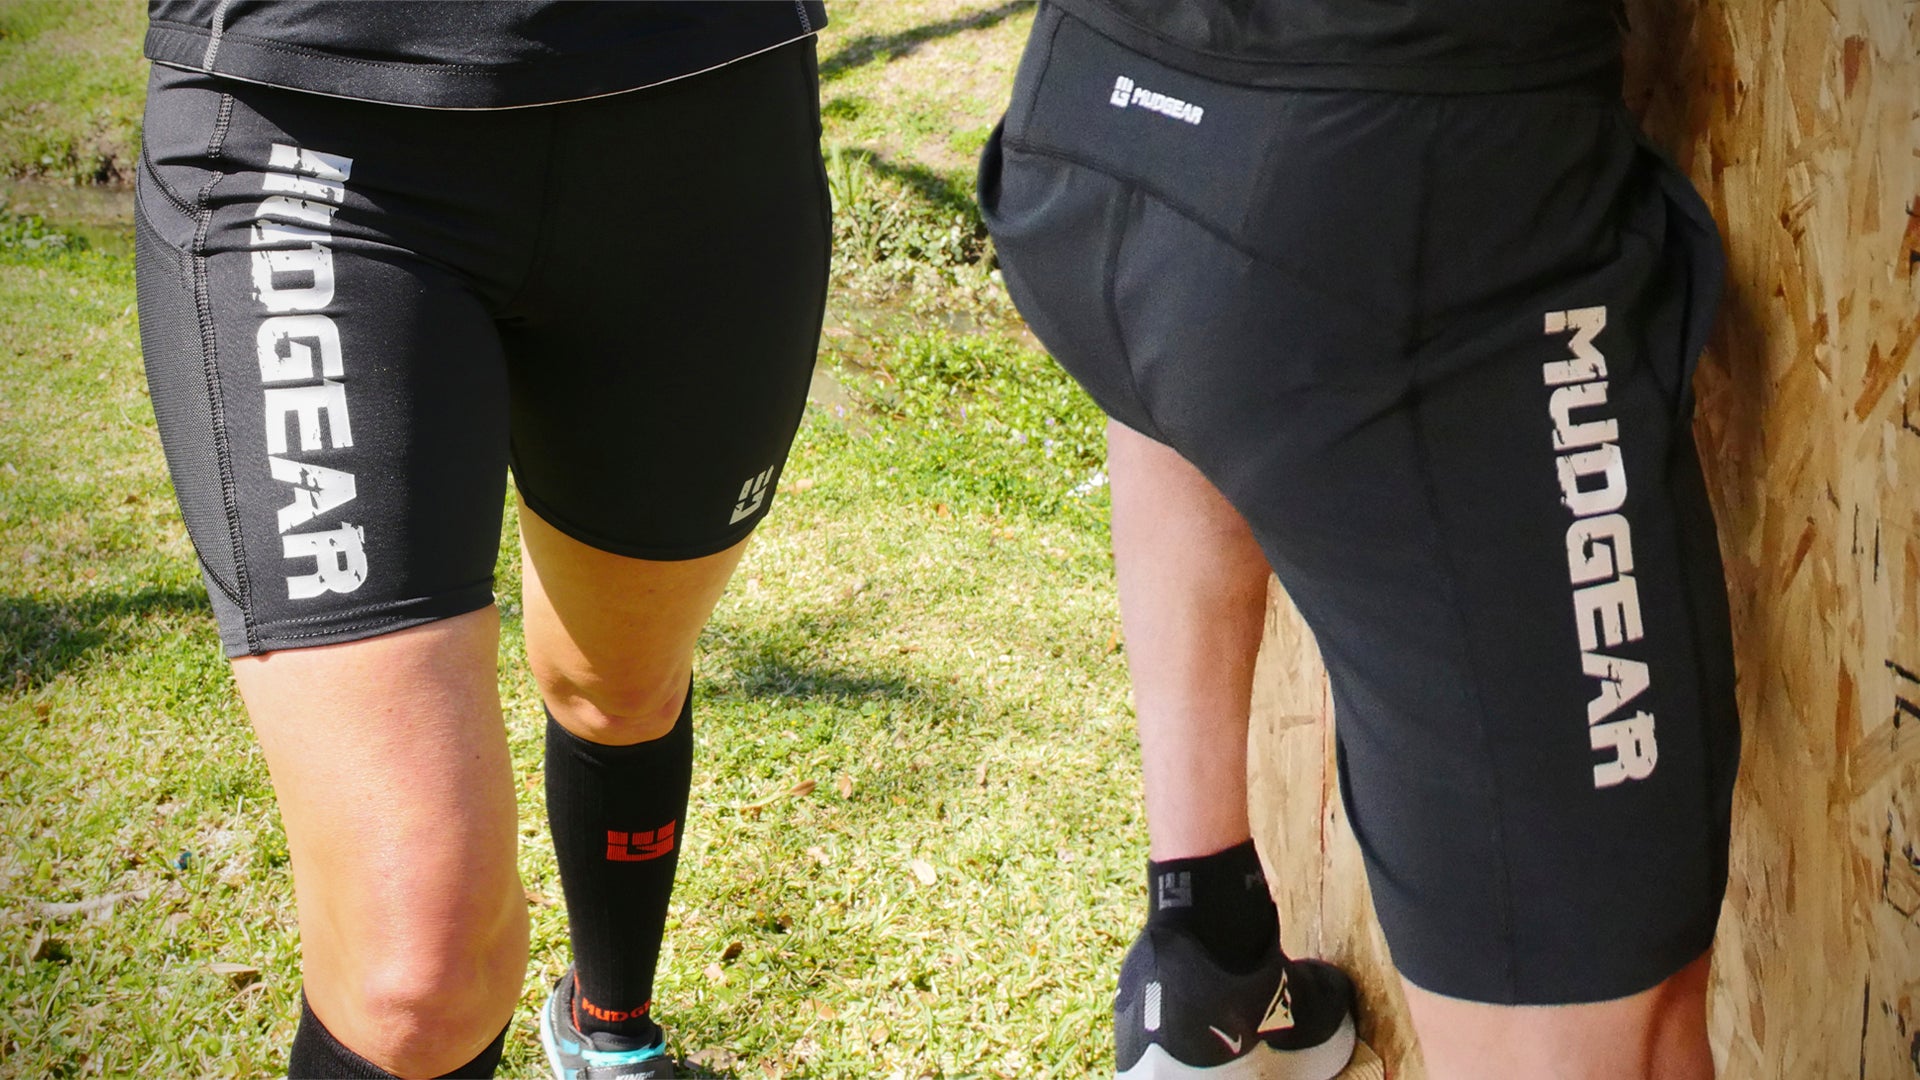 MudGear makes compression and loose fit shorts for Spartan races.